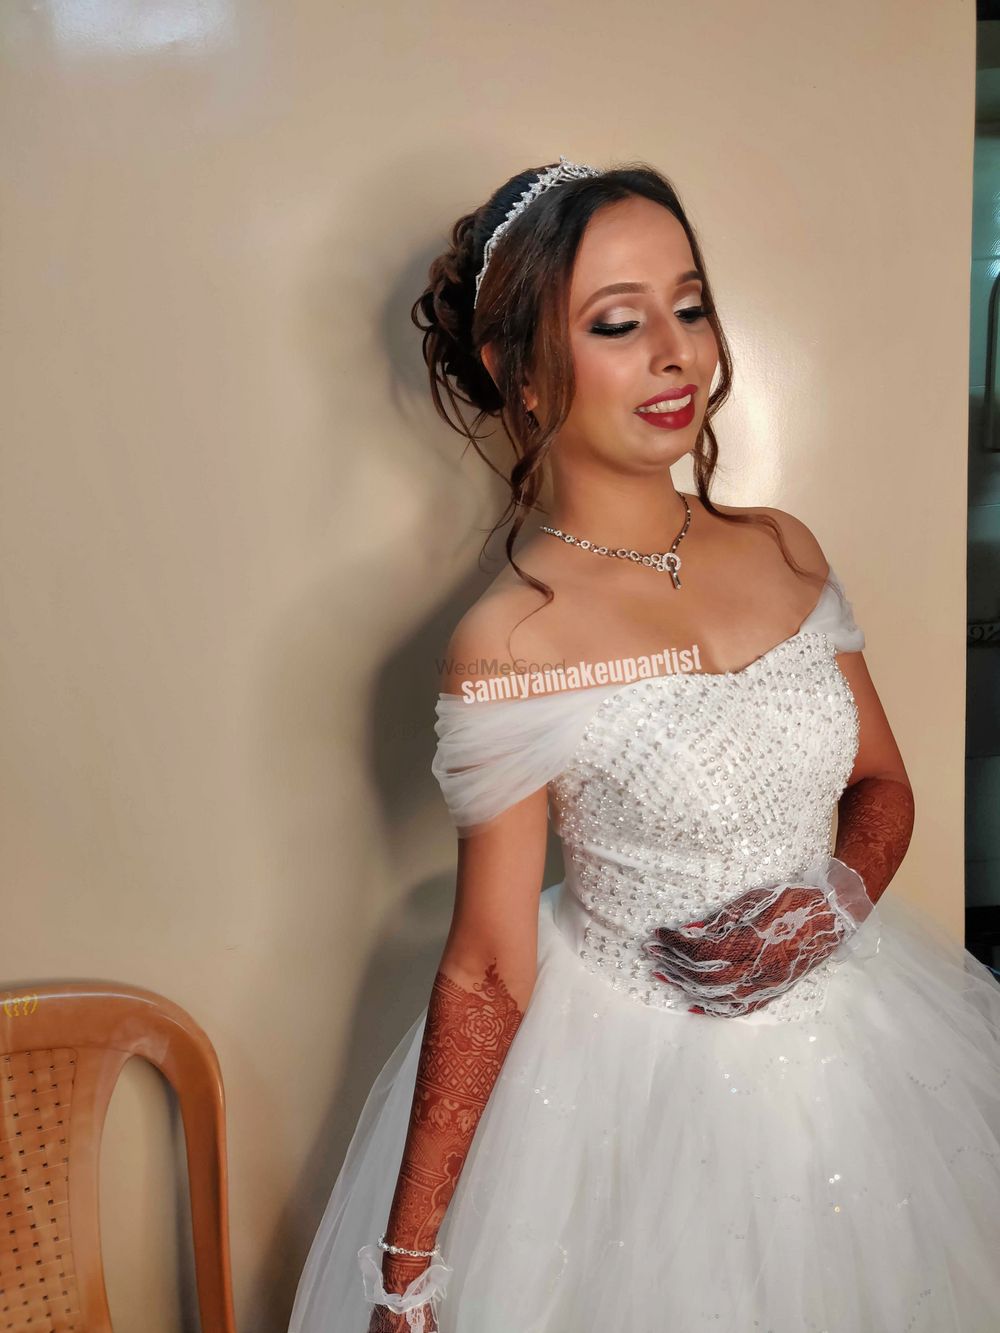 Photo From christian bride makeovers - By Makeupartistic